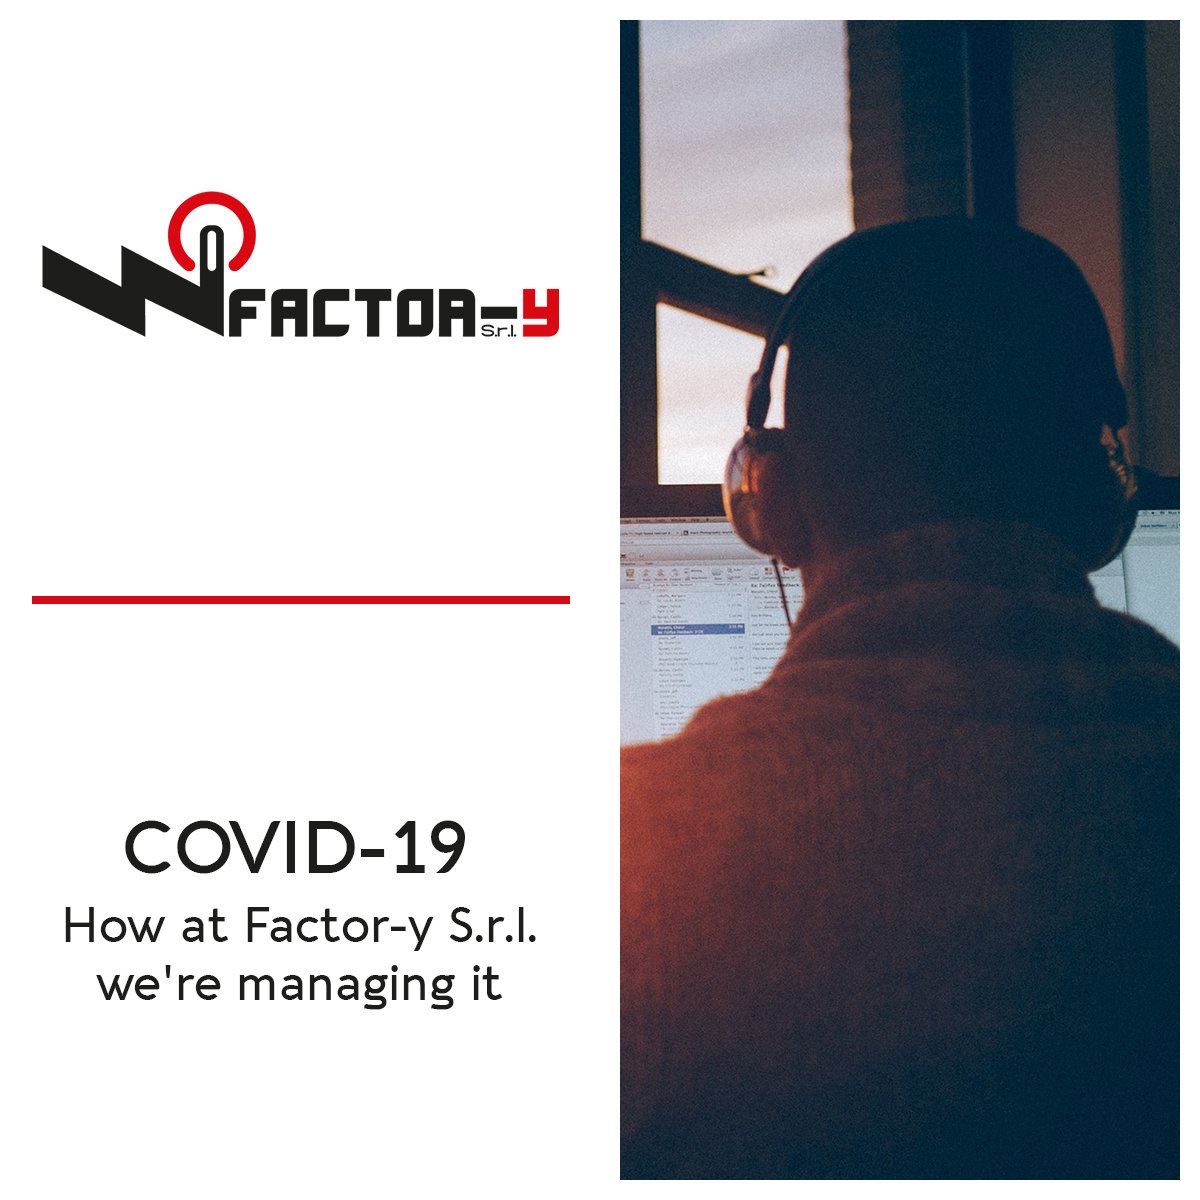 COVID-19 - How at Factor-y S.r.l. we're managing it